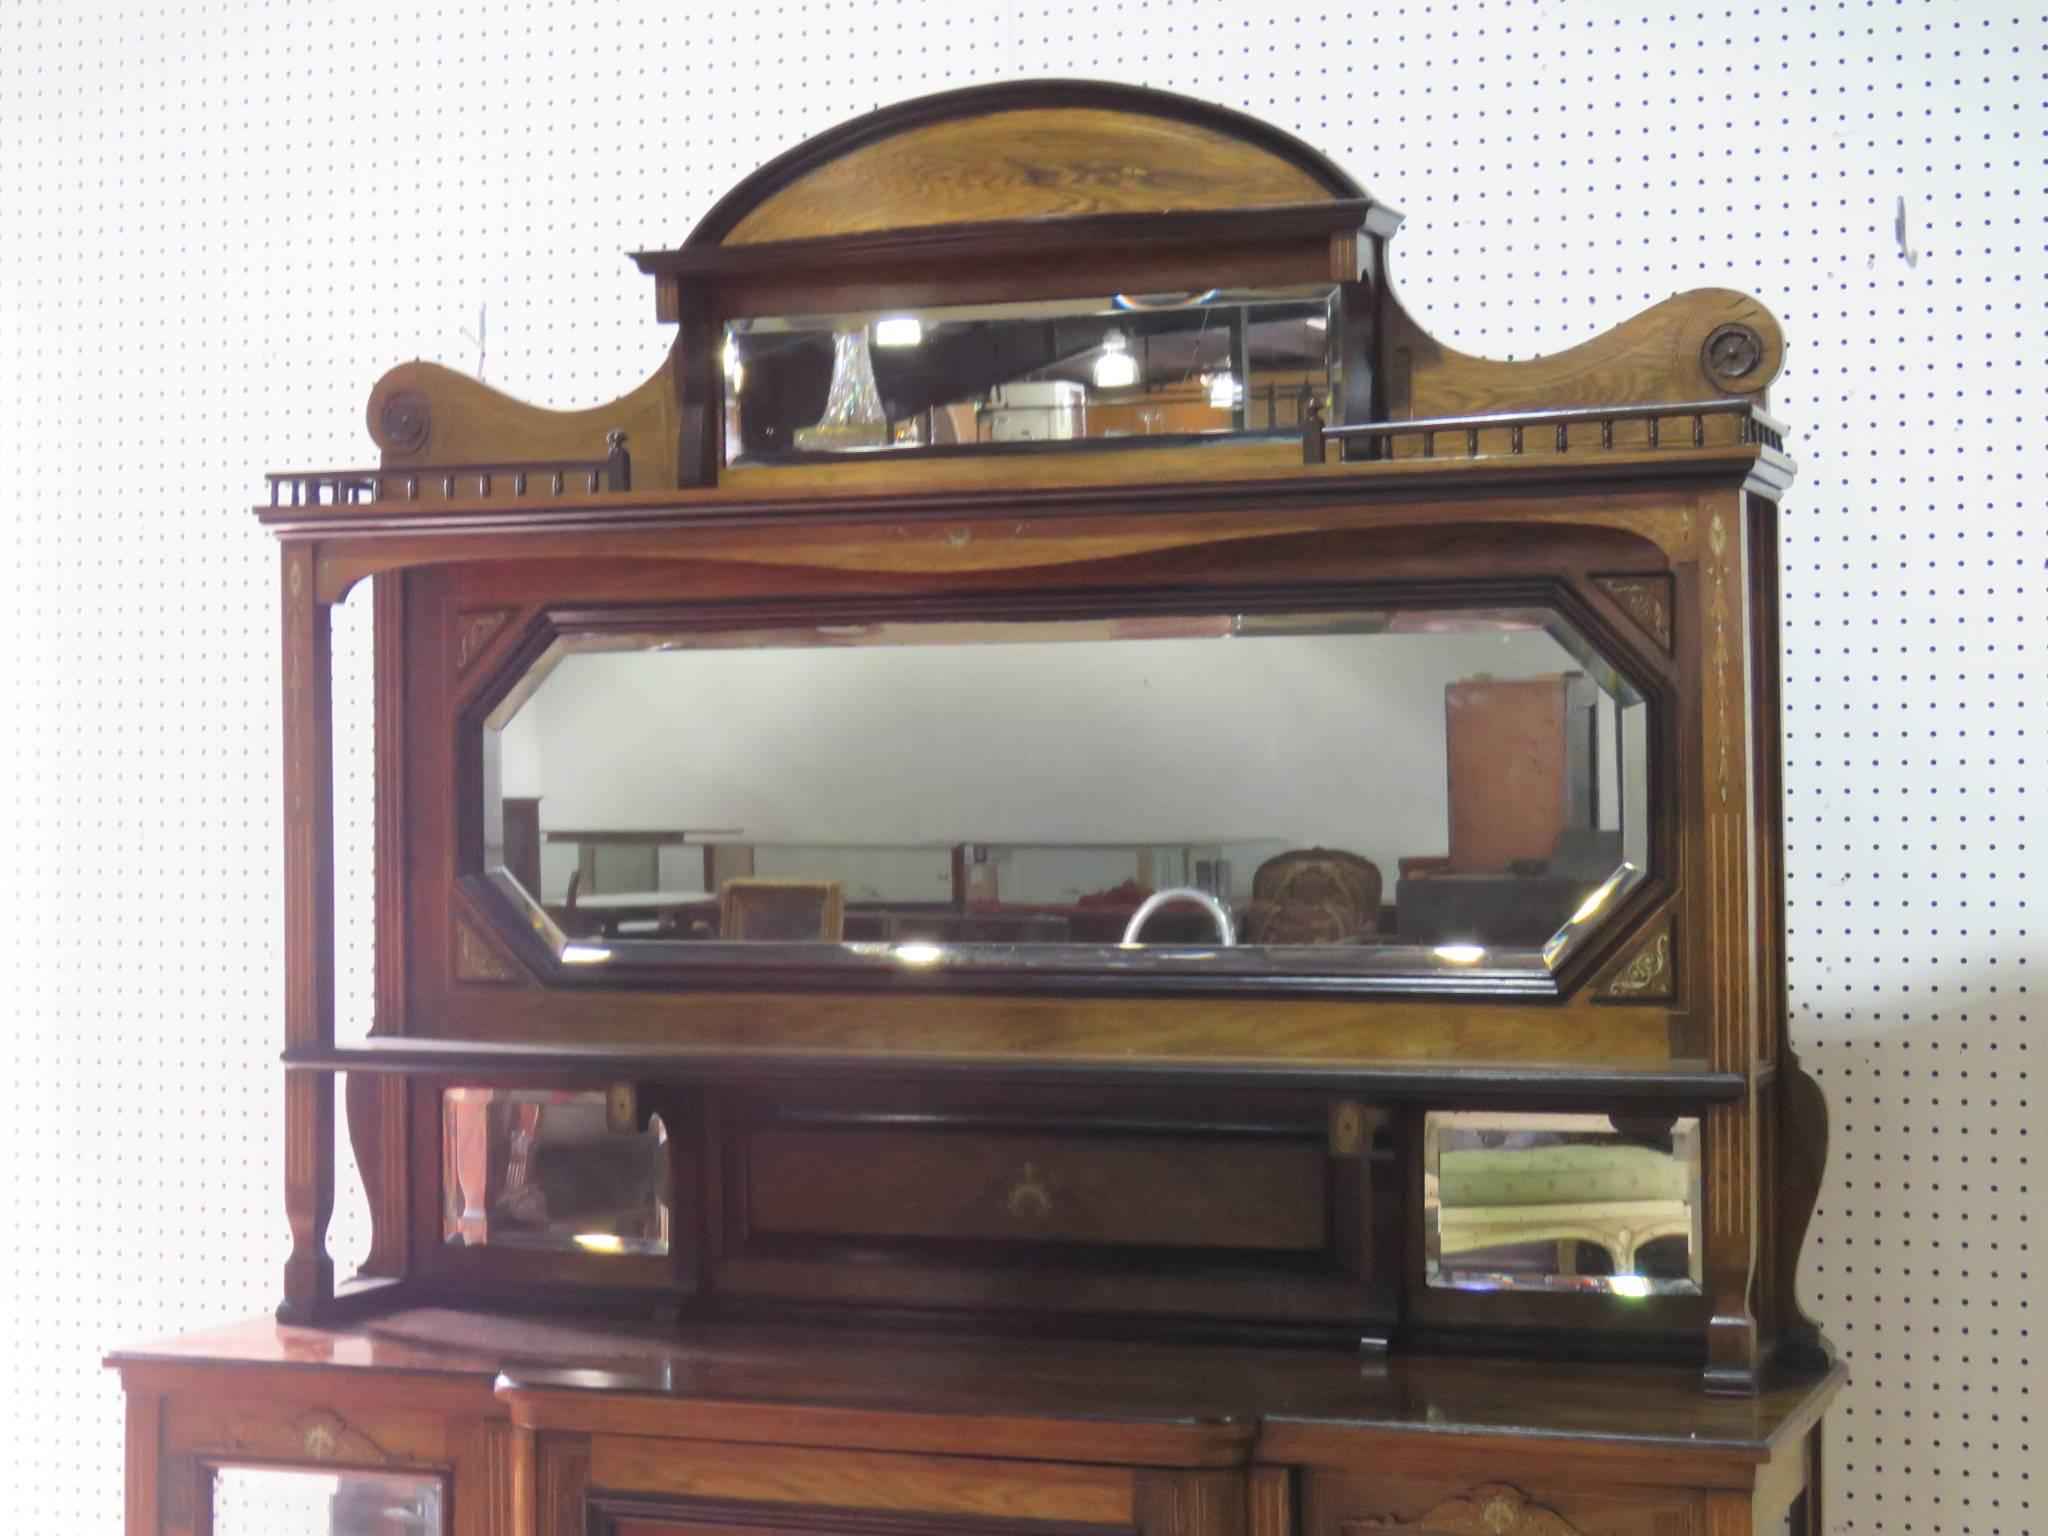 Edwardian style inlaid sideboard with superstructure. Three shelves on top with three doors and one shelf on the bottom.